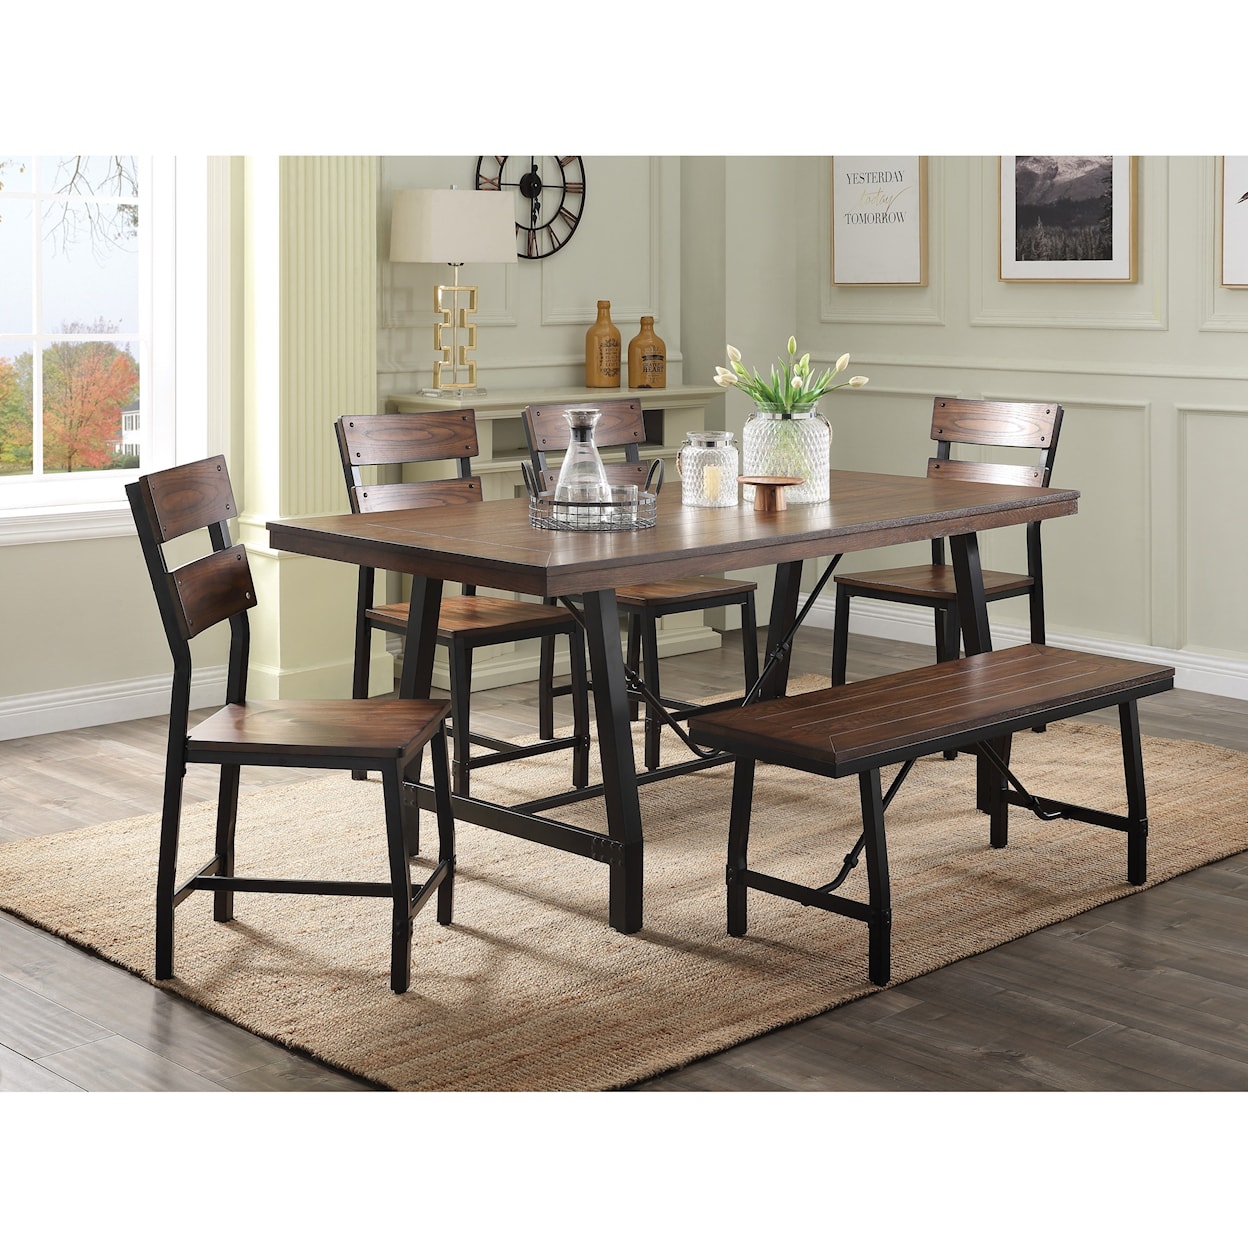 Acme Furniture Mariatu Table and Chair Set with Bench